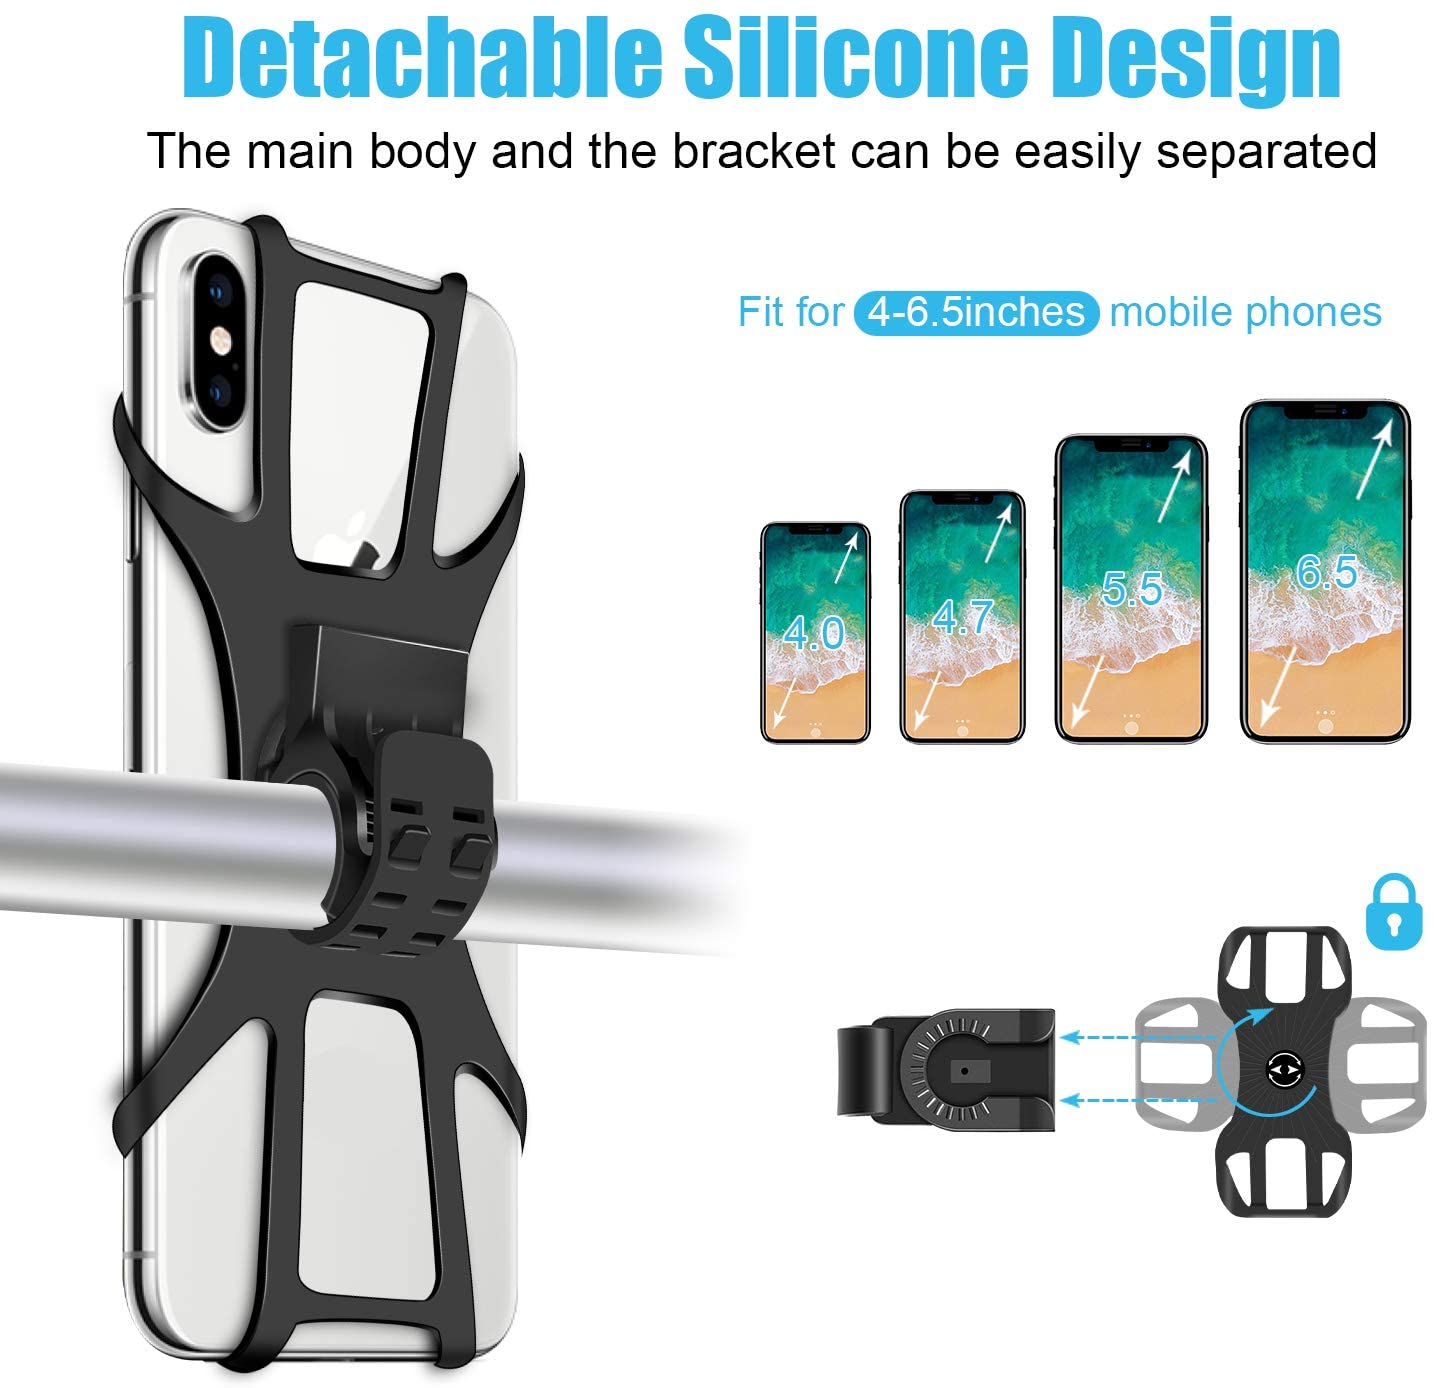 Bike Phone Mount, Silicone Phone Stand for Bicycle, 360° Adjustable, Face & Touch ID, Universal Phone Mount for iPhone 12/Pro/mini/11/Xs/Max/Xr/X/7/8/Plus, 4.0''~6.5'' Cellphones-2Pack - image 2 of 8